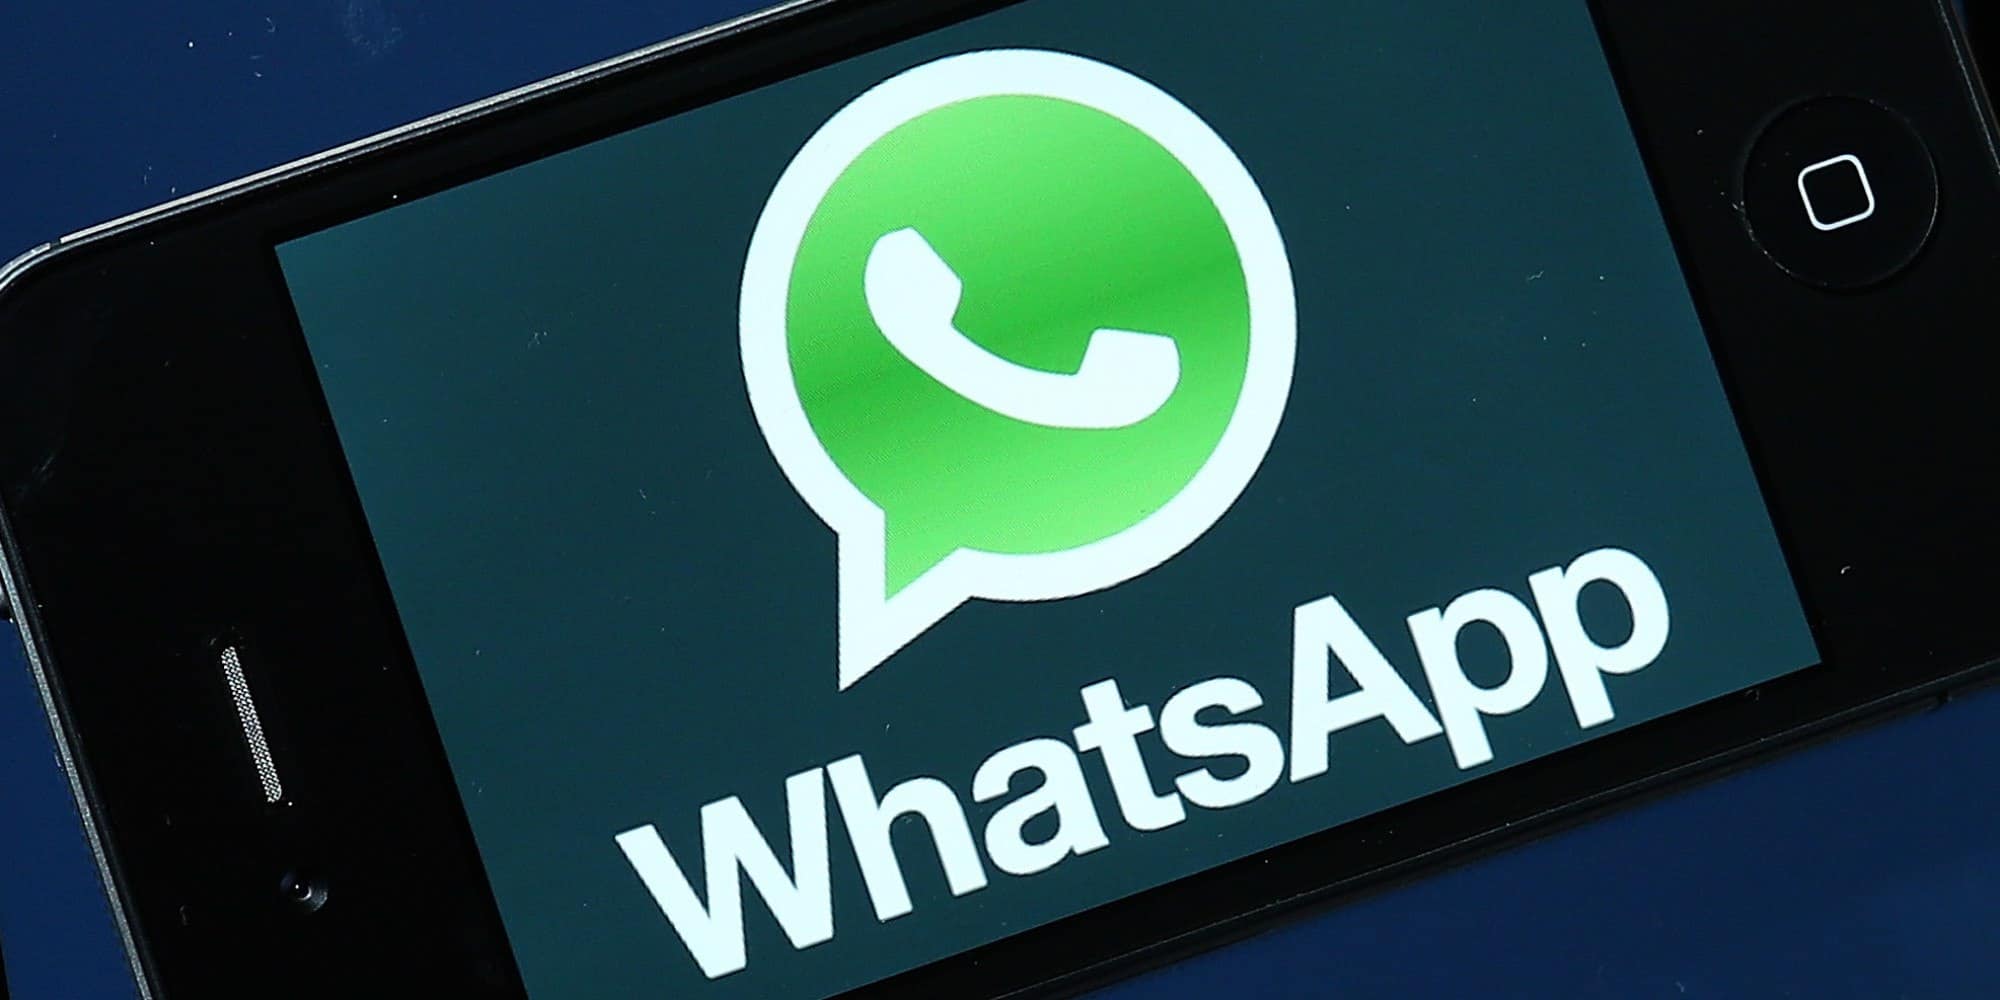 SAN FRANCISCO, CA - FEBRUARY 19: Facebook and WhatsApp logos are displayed on portable electronic devices on February 19, 2014 in San Francisco City. Facebook Inc. announced that it will purchase smartphone-messaging app company WhatsApp Inc. for $19 billion in cash and stock. (Photo Illustration by Justin Sullivan/Getty Images)